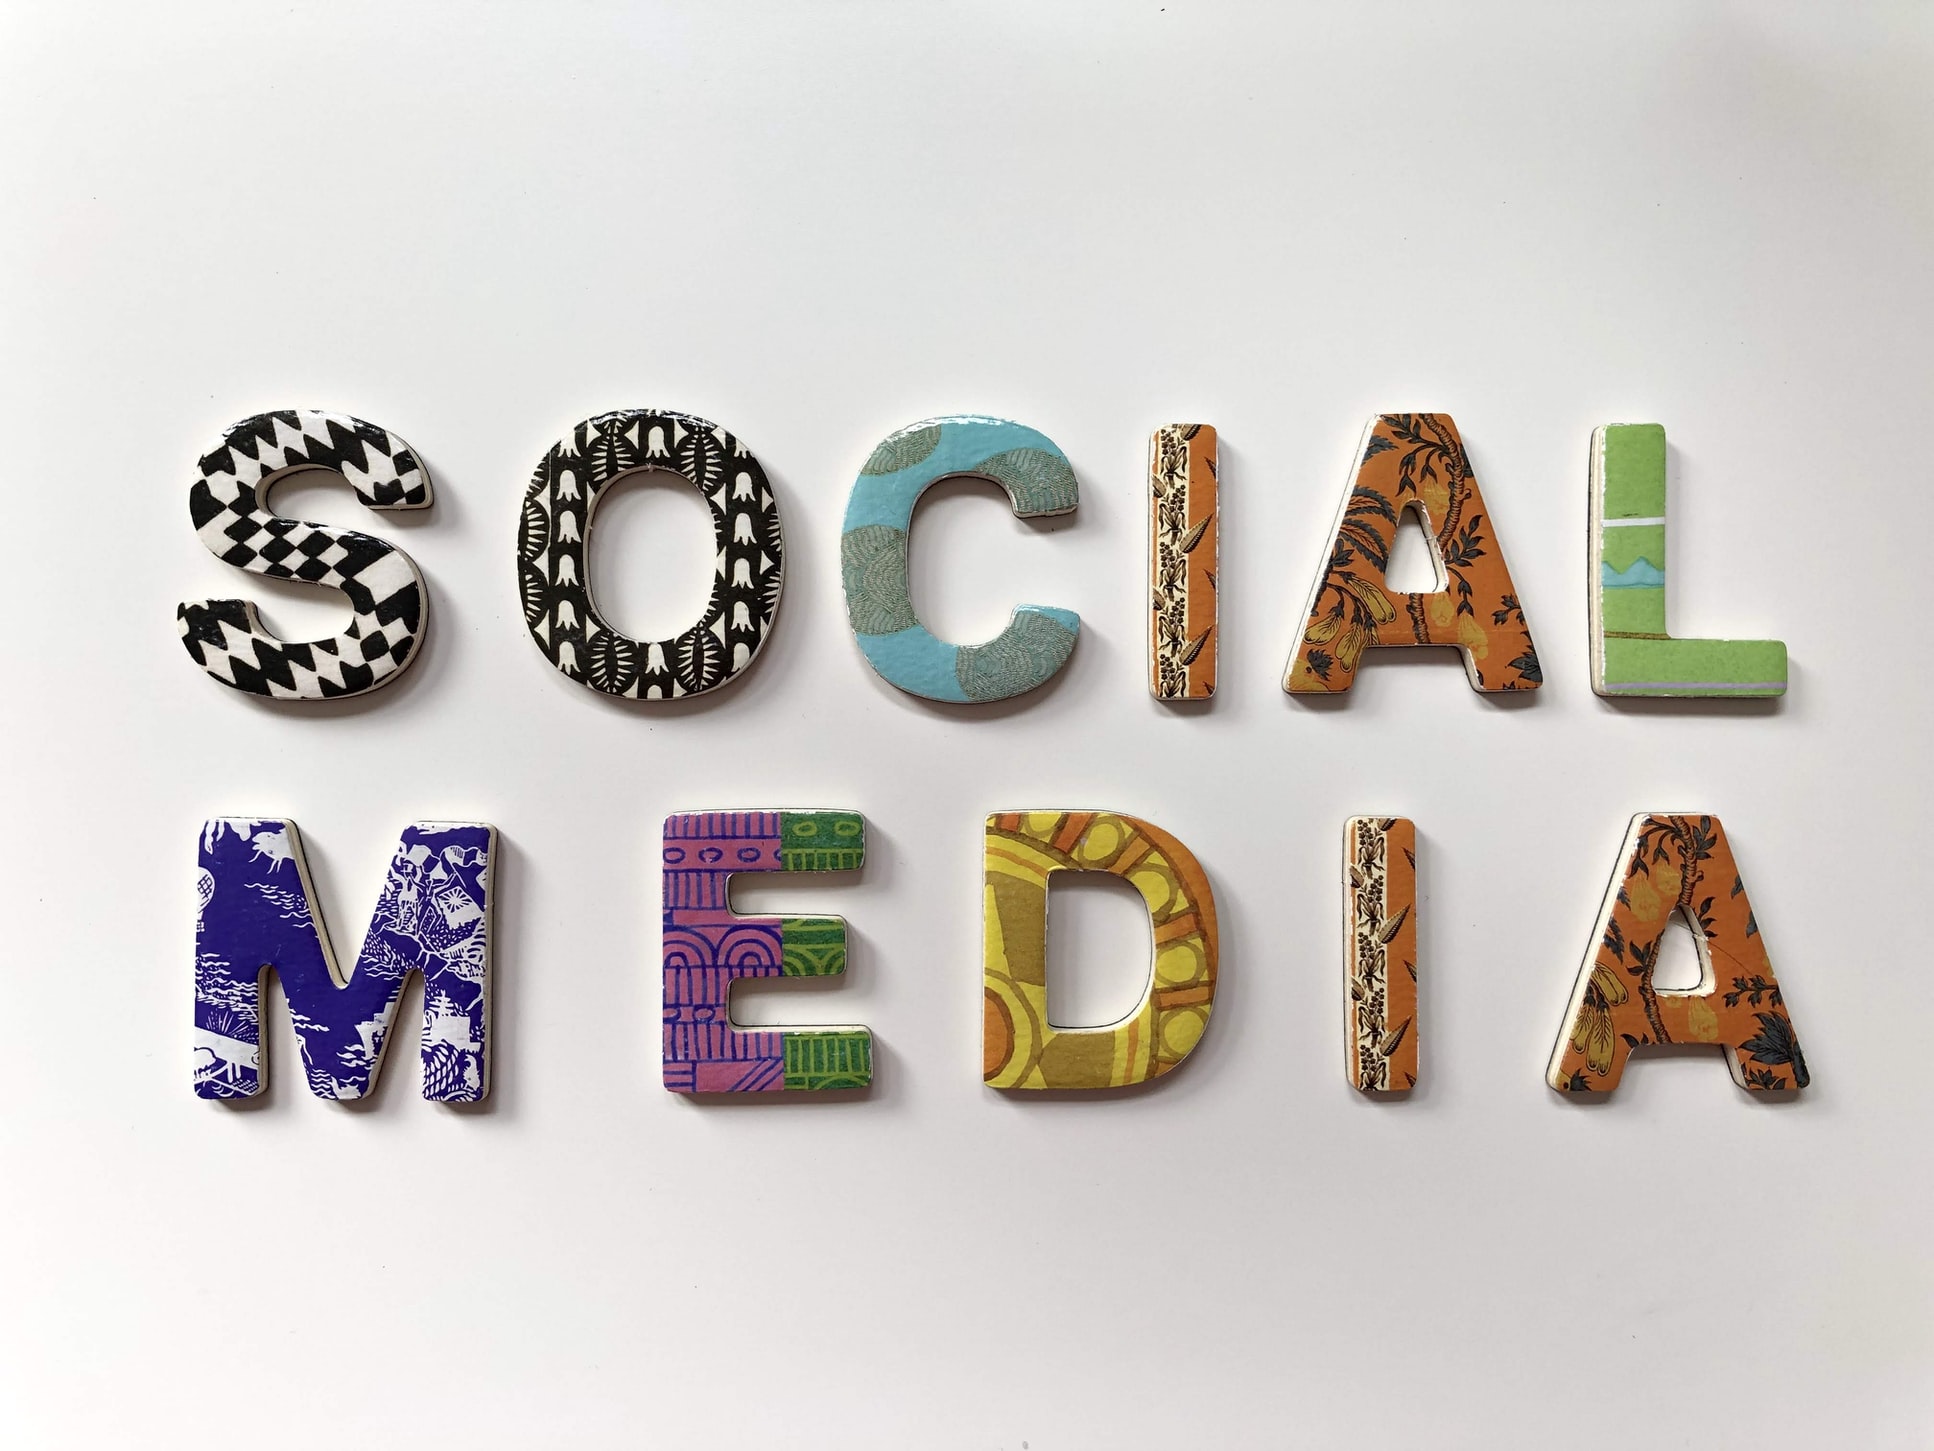 Top 5 Tips to Enhance Your Brand on Social Media